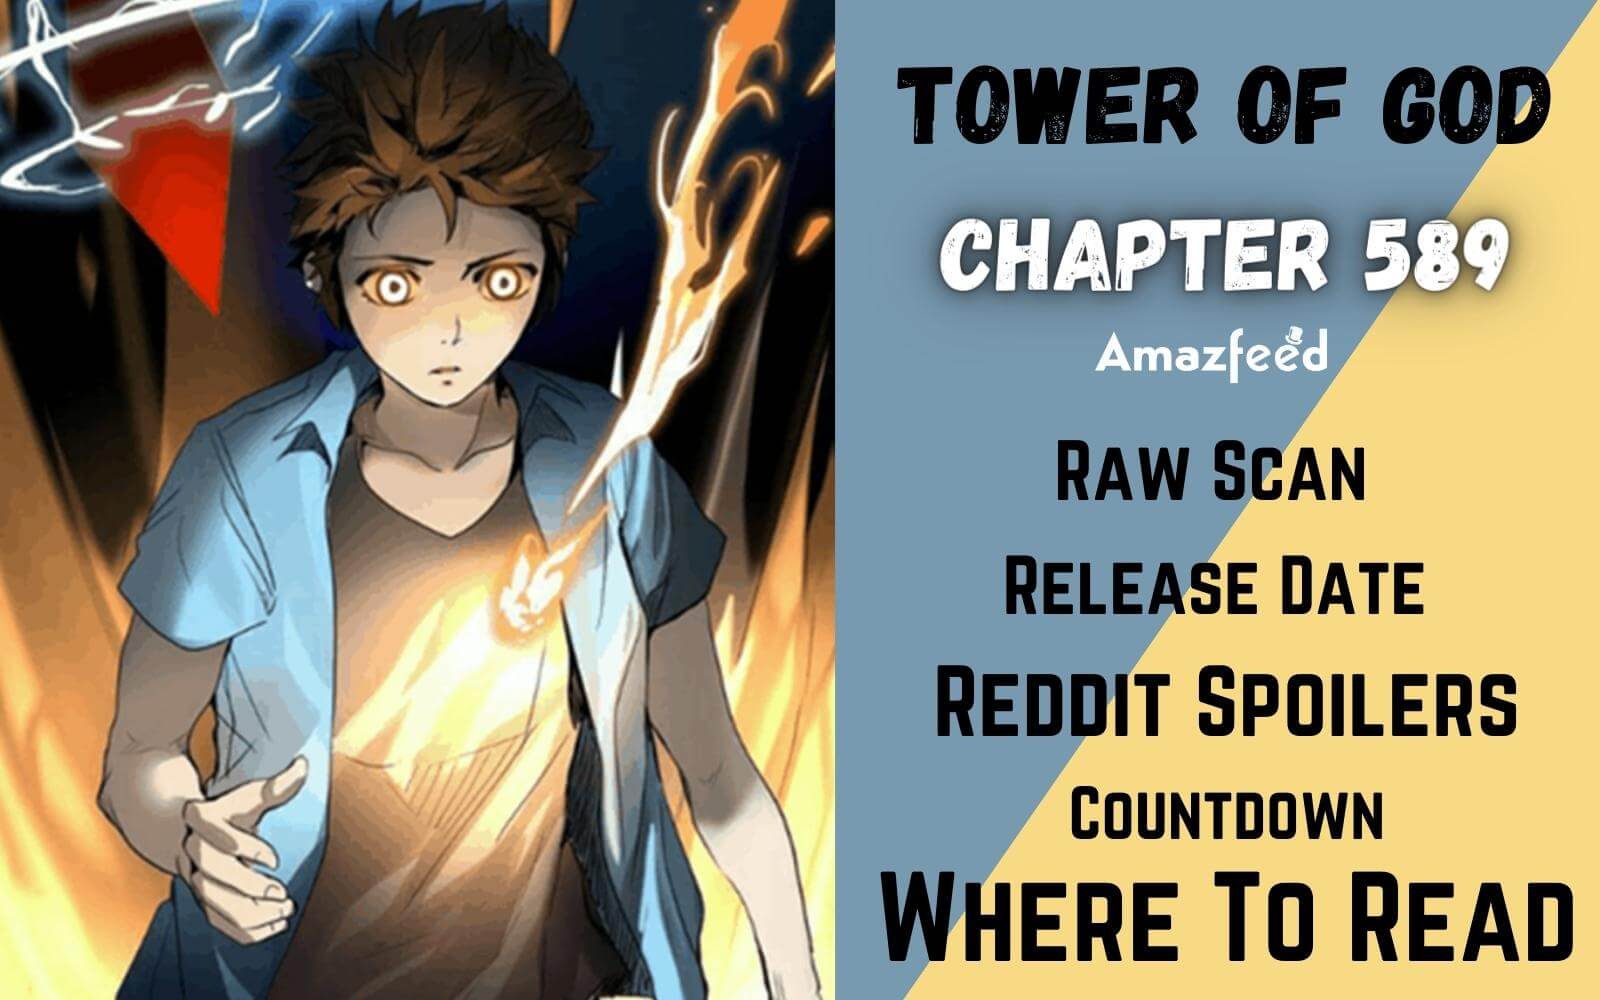 Tower Of God Chapter 588 Tower Of God Chapter 589 Spoilers, Raw Scan, Release Date, Countdown &  Where to Read » Amazfeed